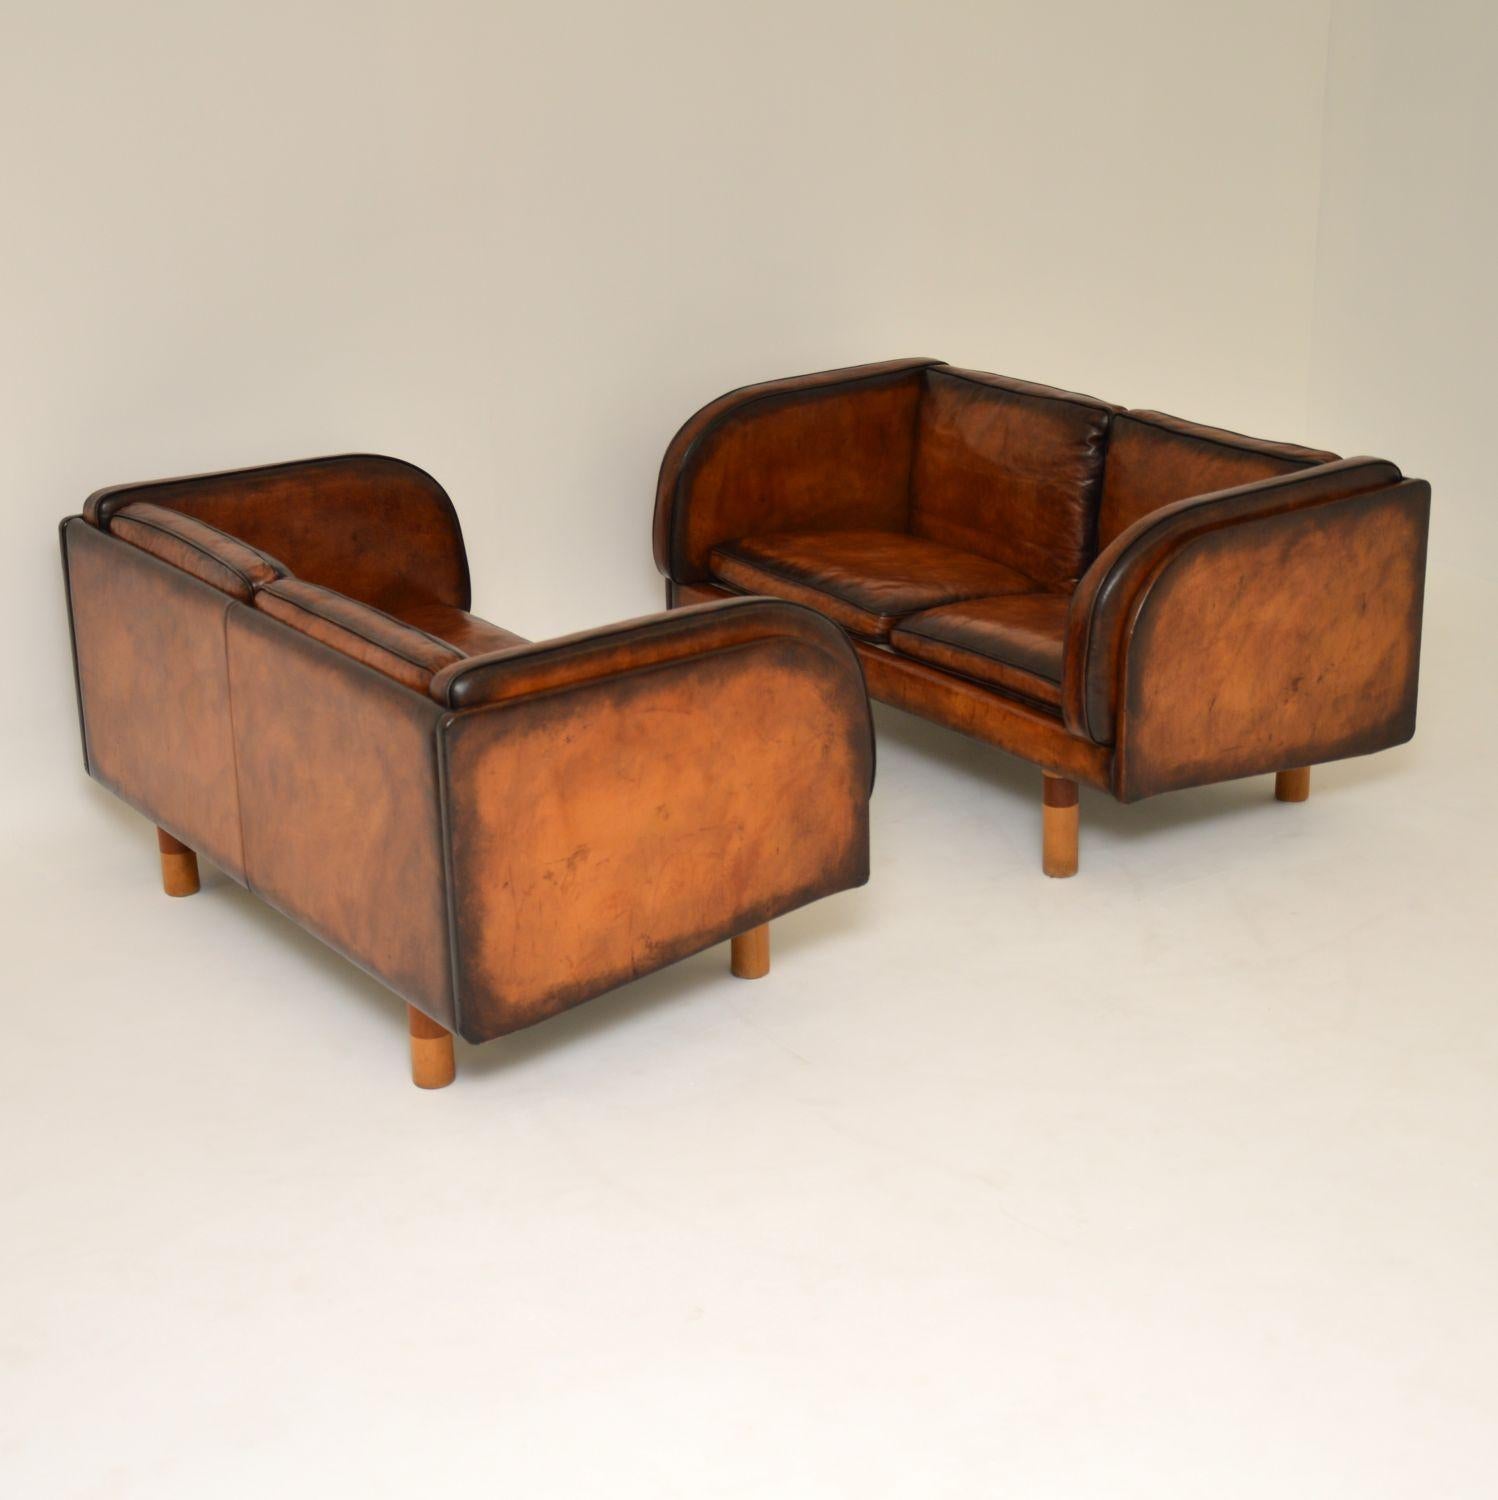 A stunning pair of vintage Danish leather sofas of the highest quality, these were designed by the architect Jorgen Gammelgaard, they were made by the high end Danish manufacturer Erik Jorgensen in the 1980s. They have been beautifully hand colored